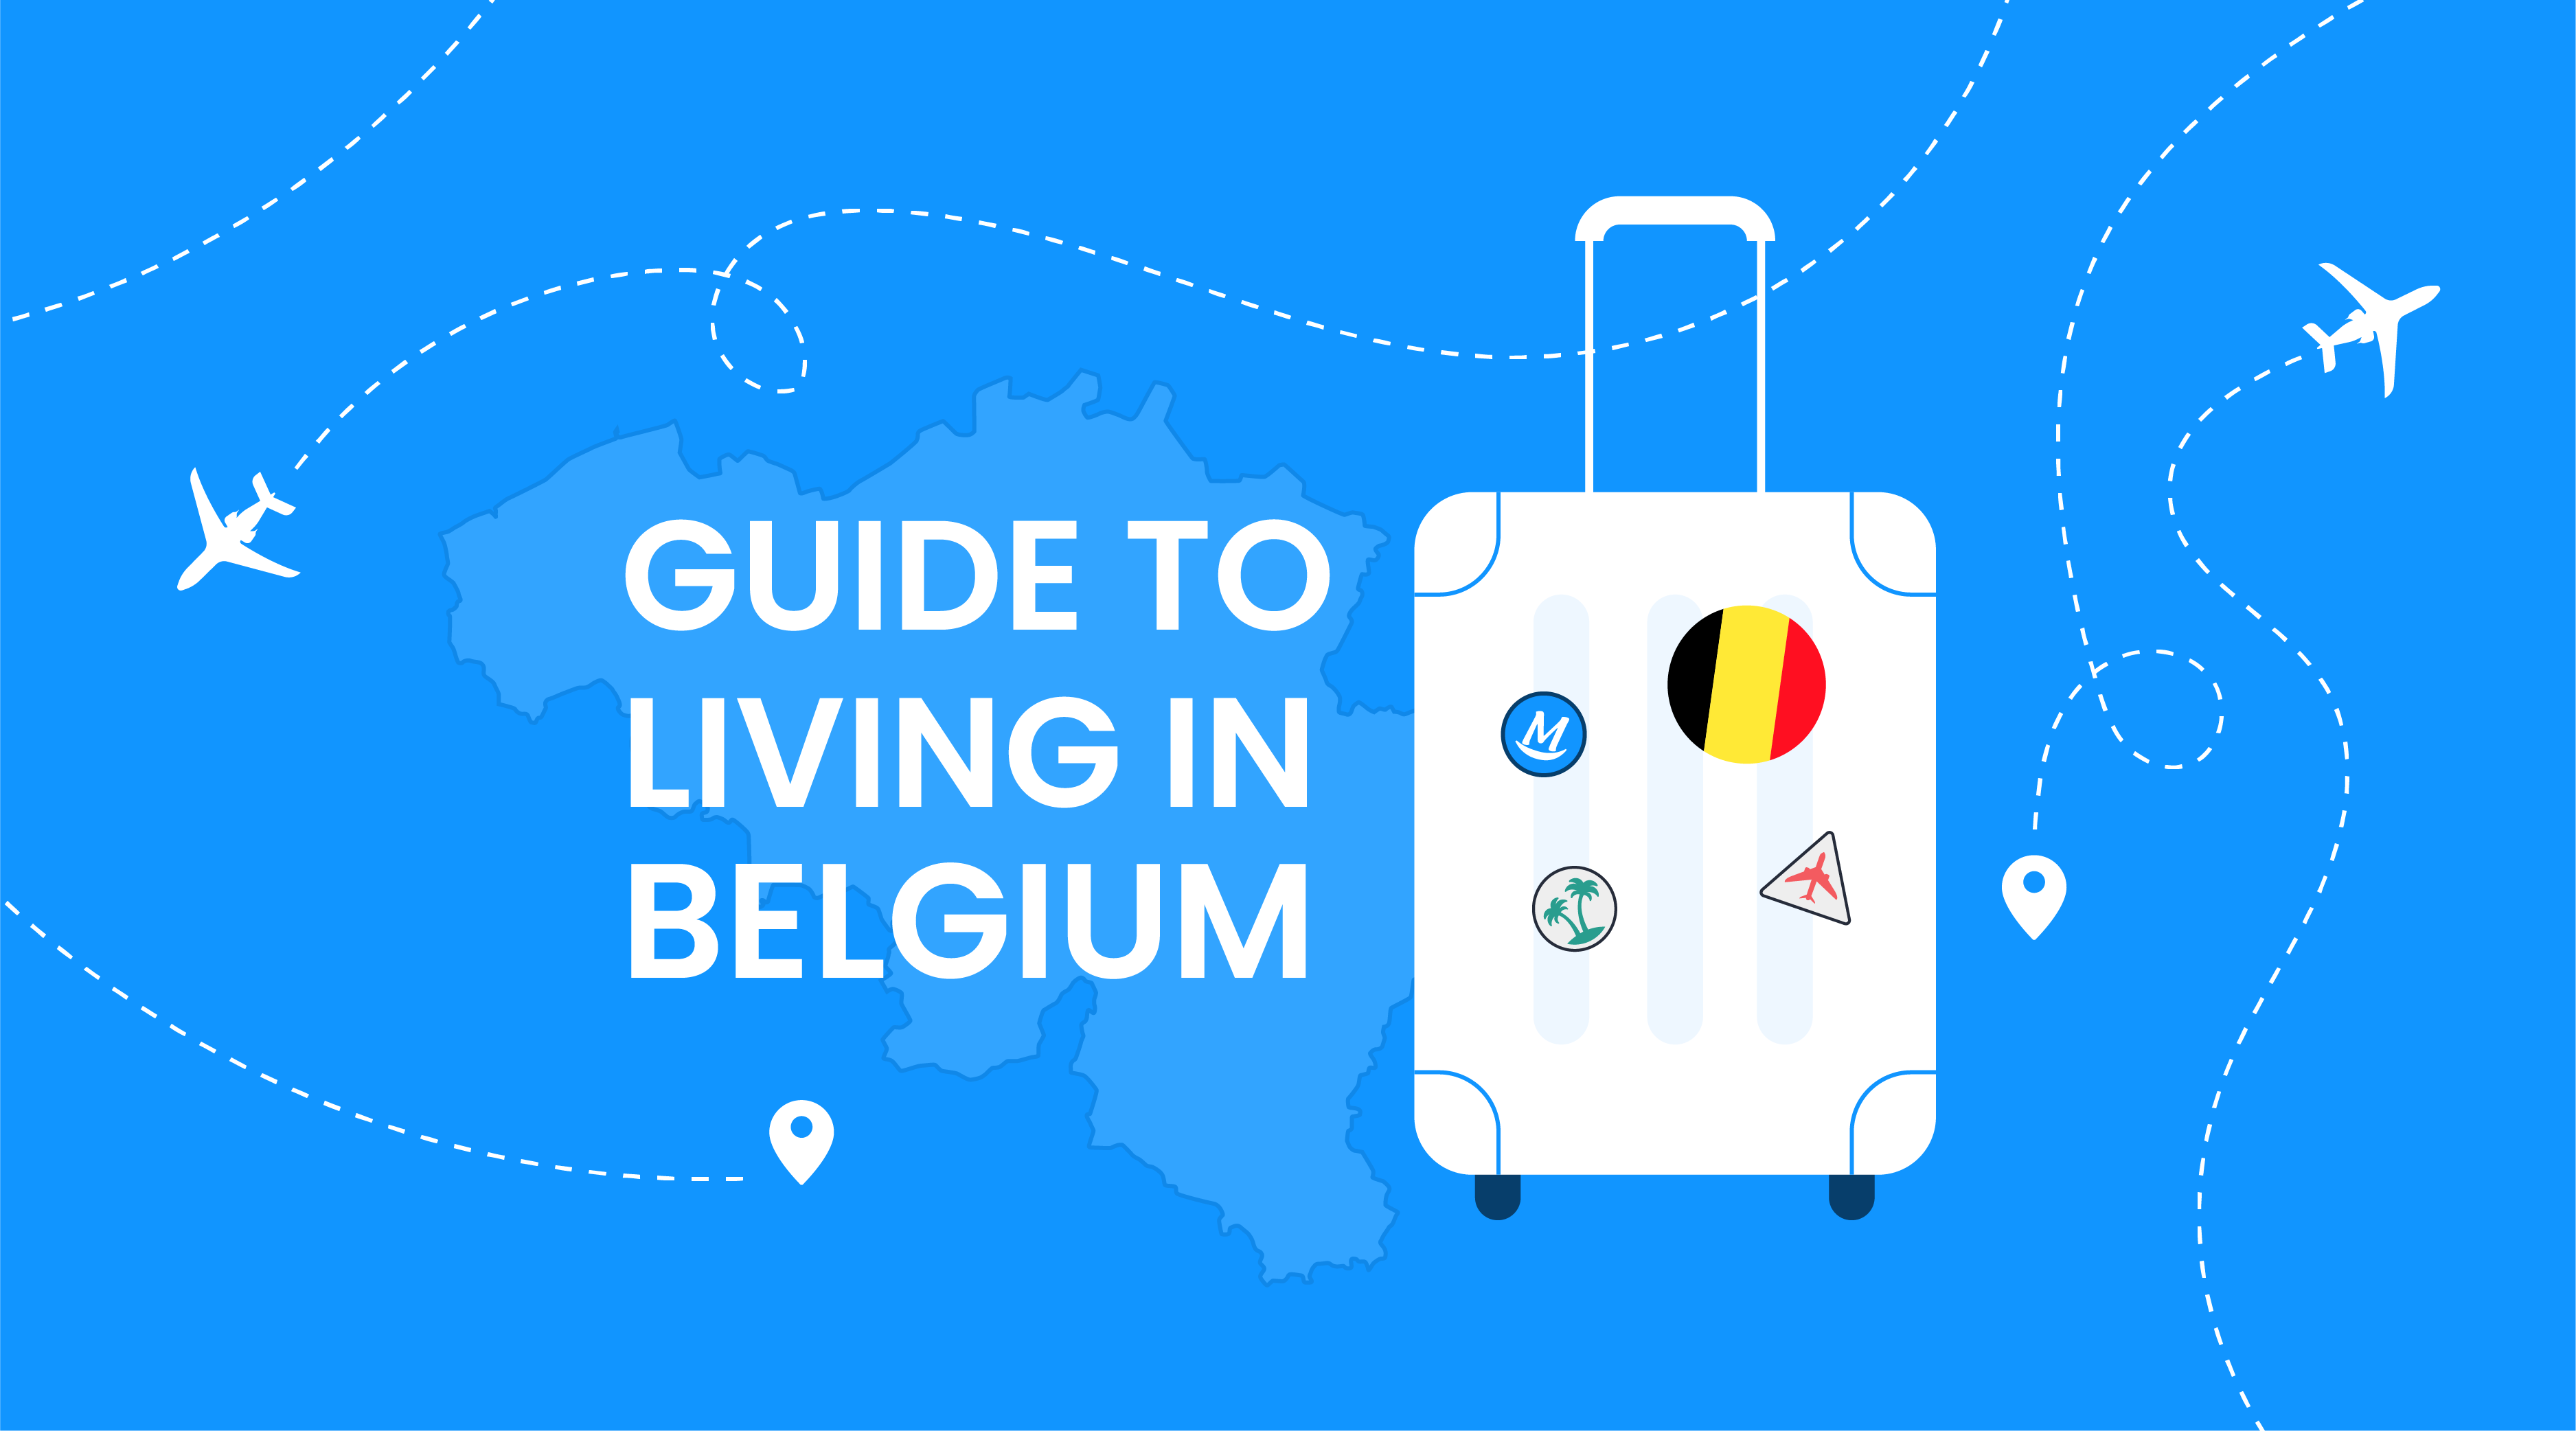 What does it take to move to Belgium?